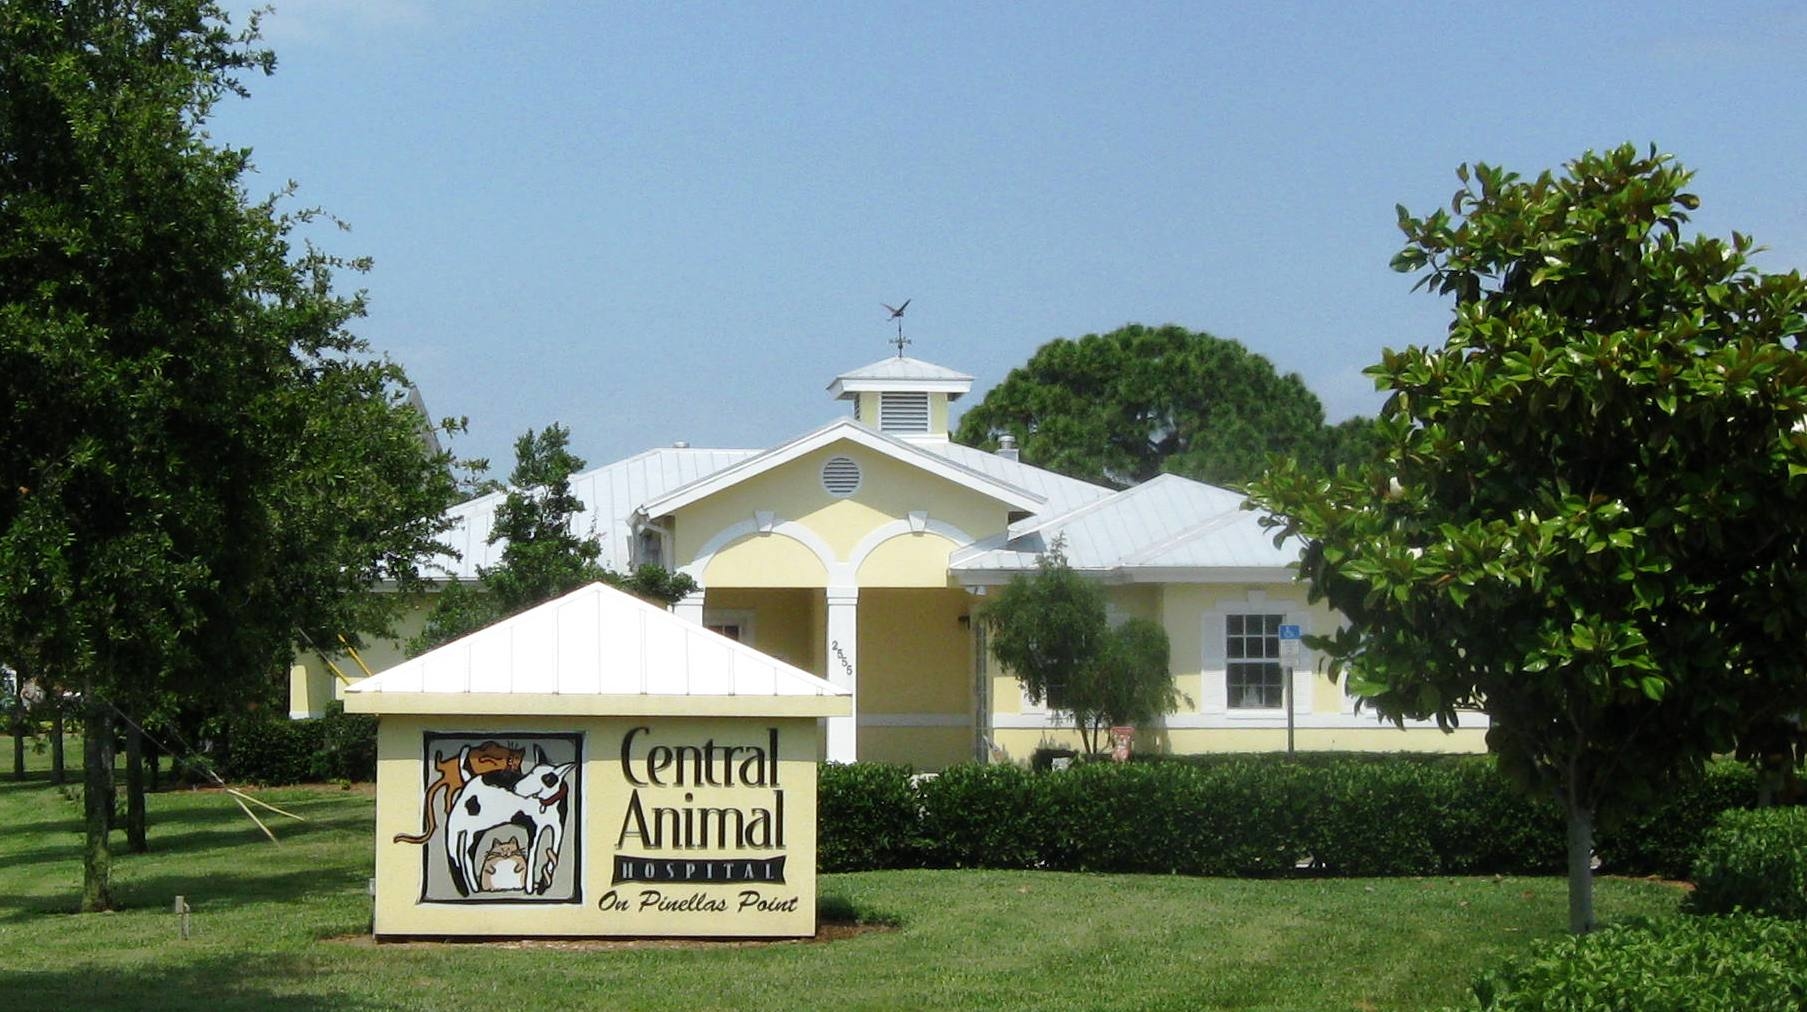 Central Animal Hospital on Pinellas Point Photo